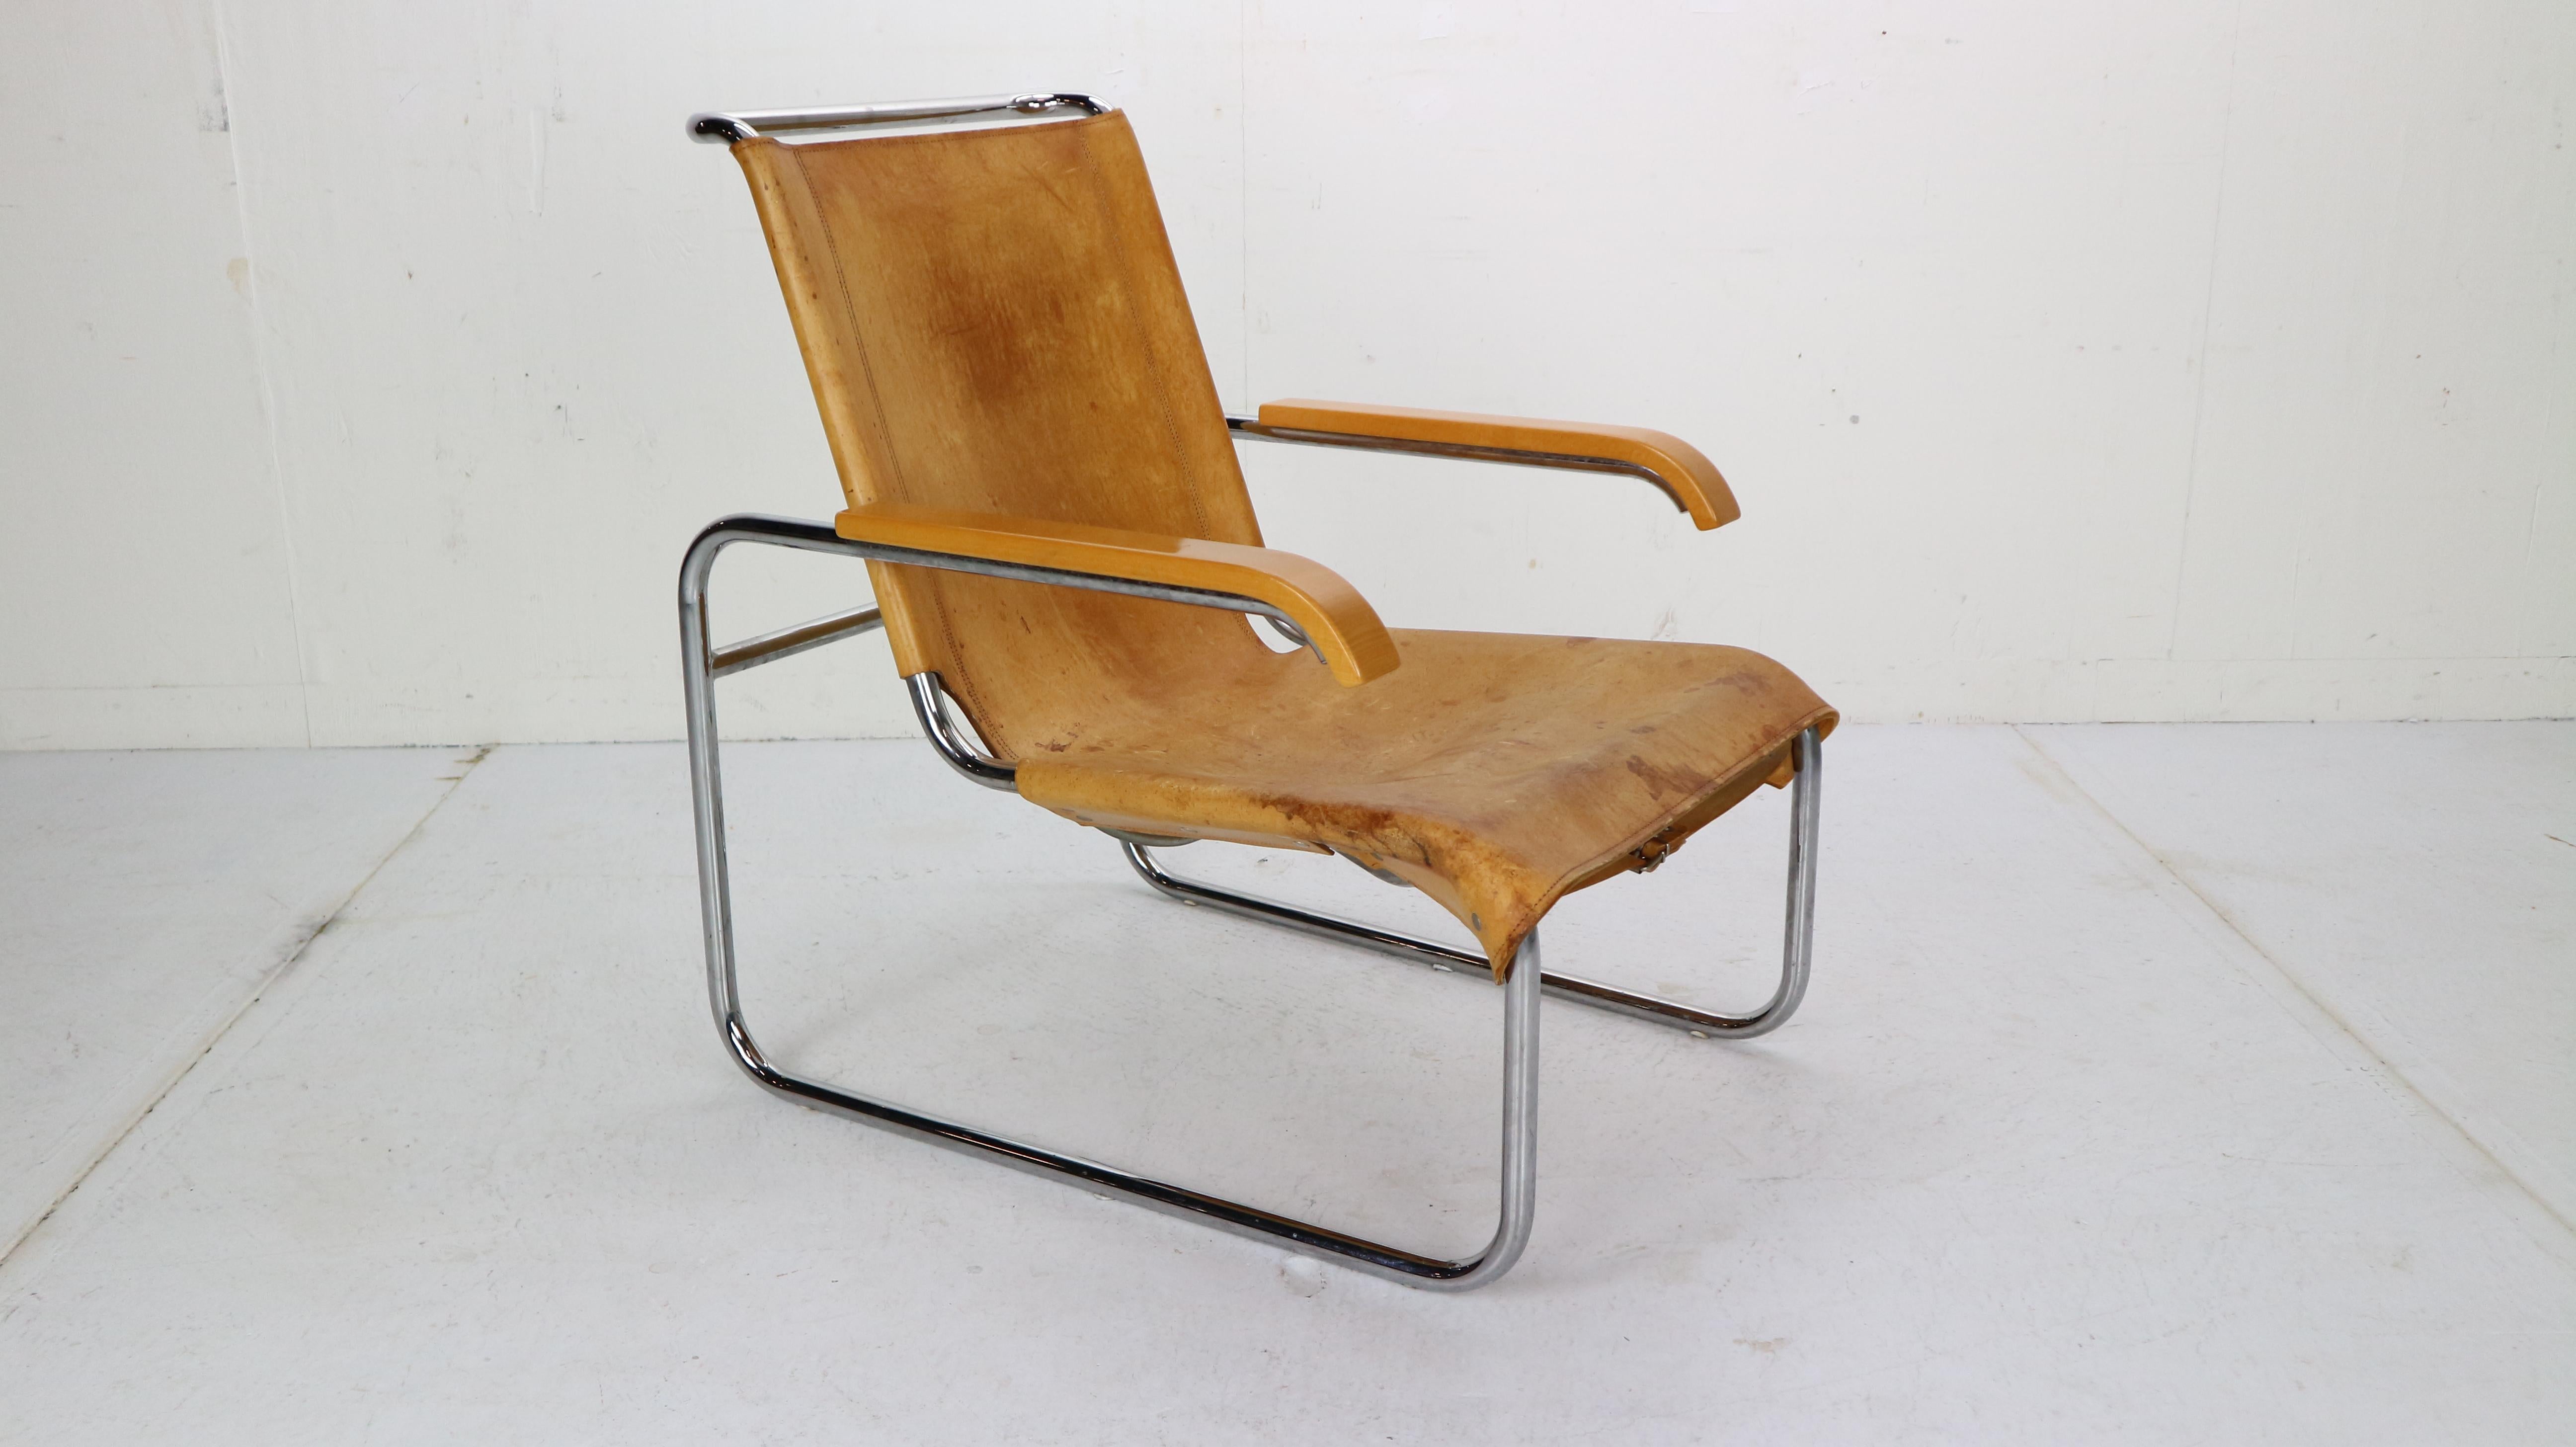 Bauhaus Marcel Breuer B35 Leather Lounge Chair/Armchair for Thonet, 1930s, Germany